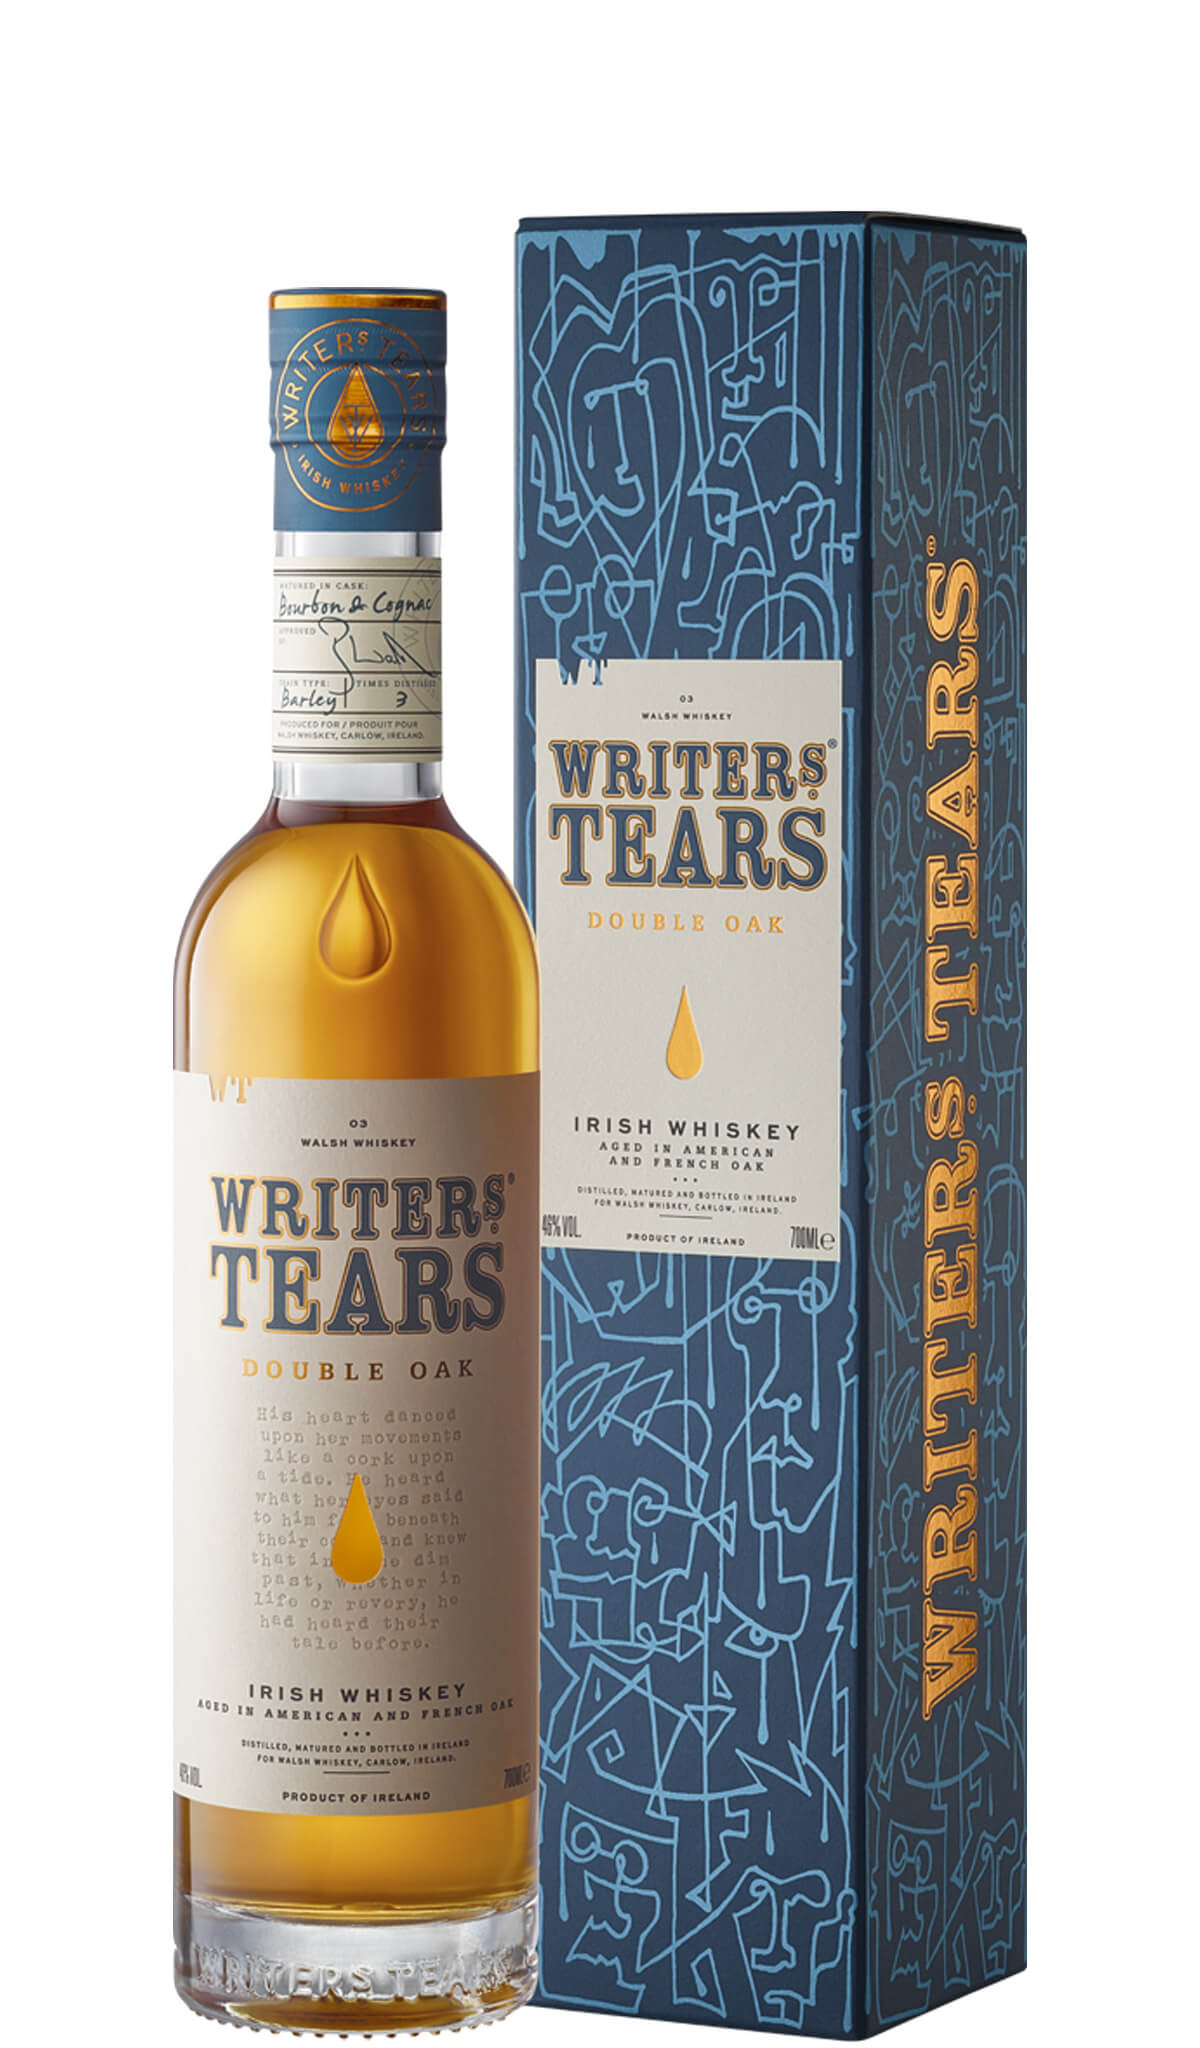 Find out more or buy Writers Tears Double Oak Irish Whiskey 700ml online at Wine Sellers Direct - Australia’s independent liquor specialists.